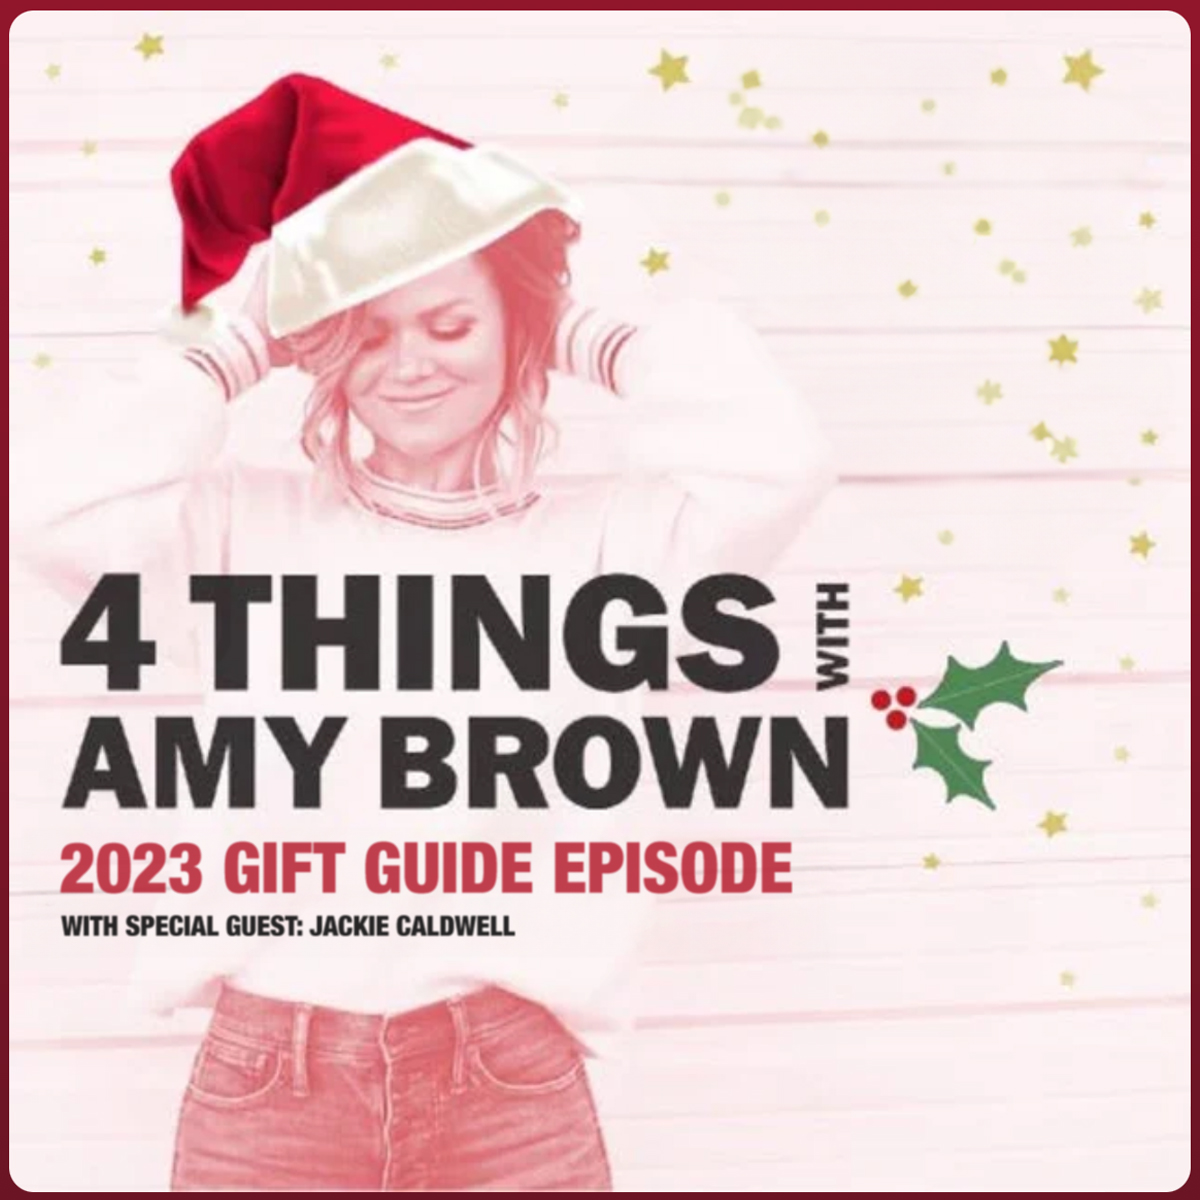 Gift Guide + GIVEAWAY + Fashion, Beauty & Shopping Tips + Ideas for Experiences + More